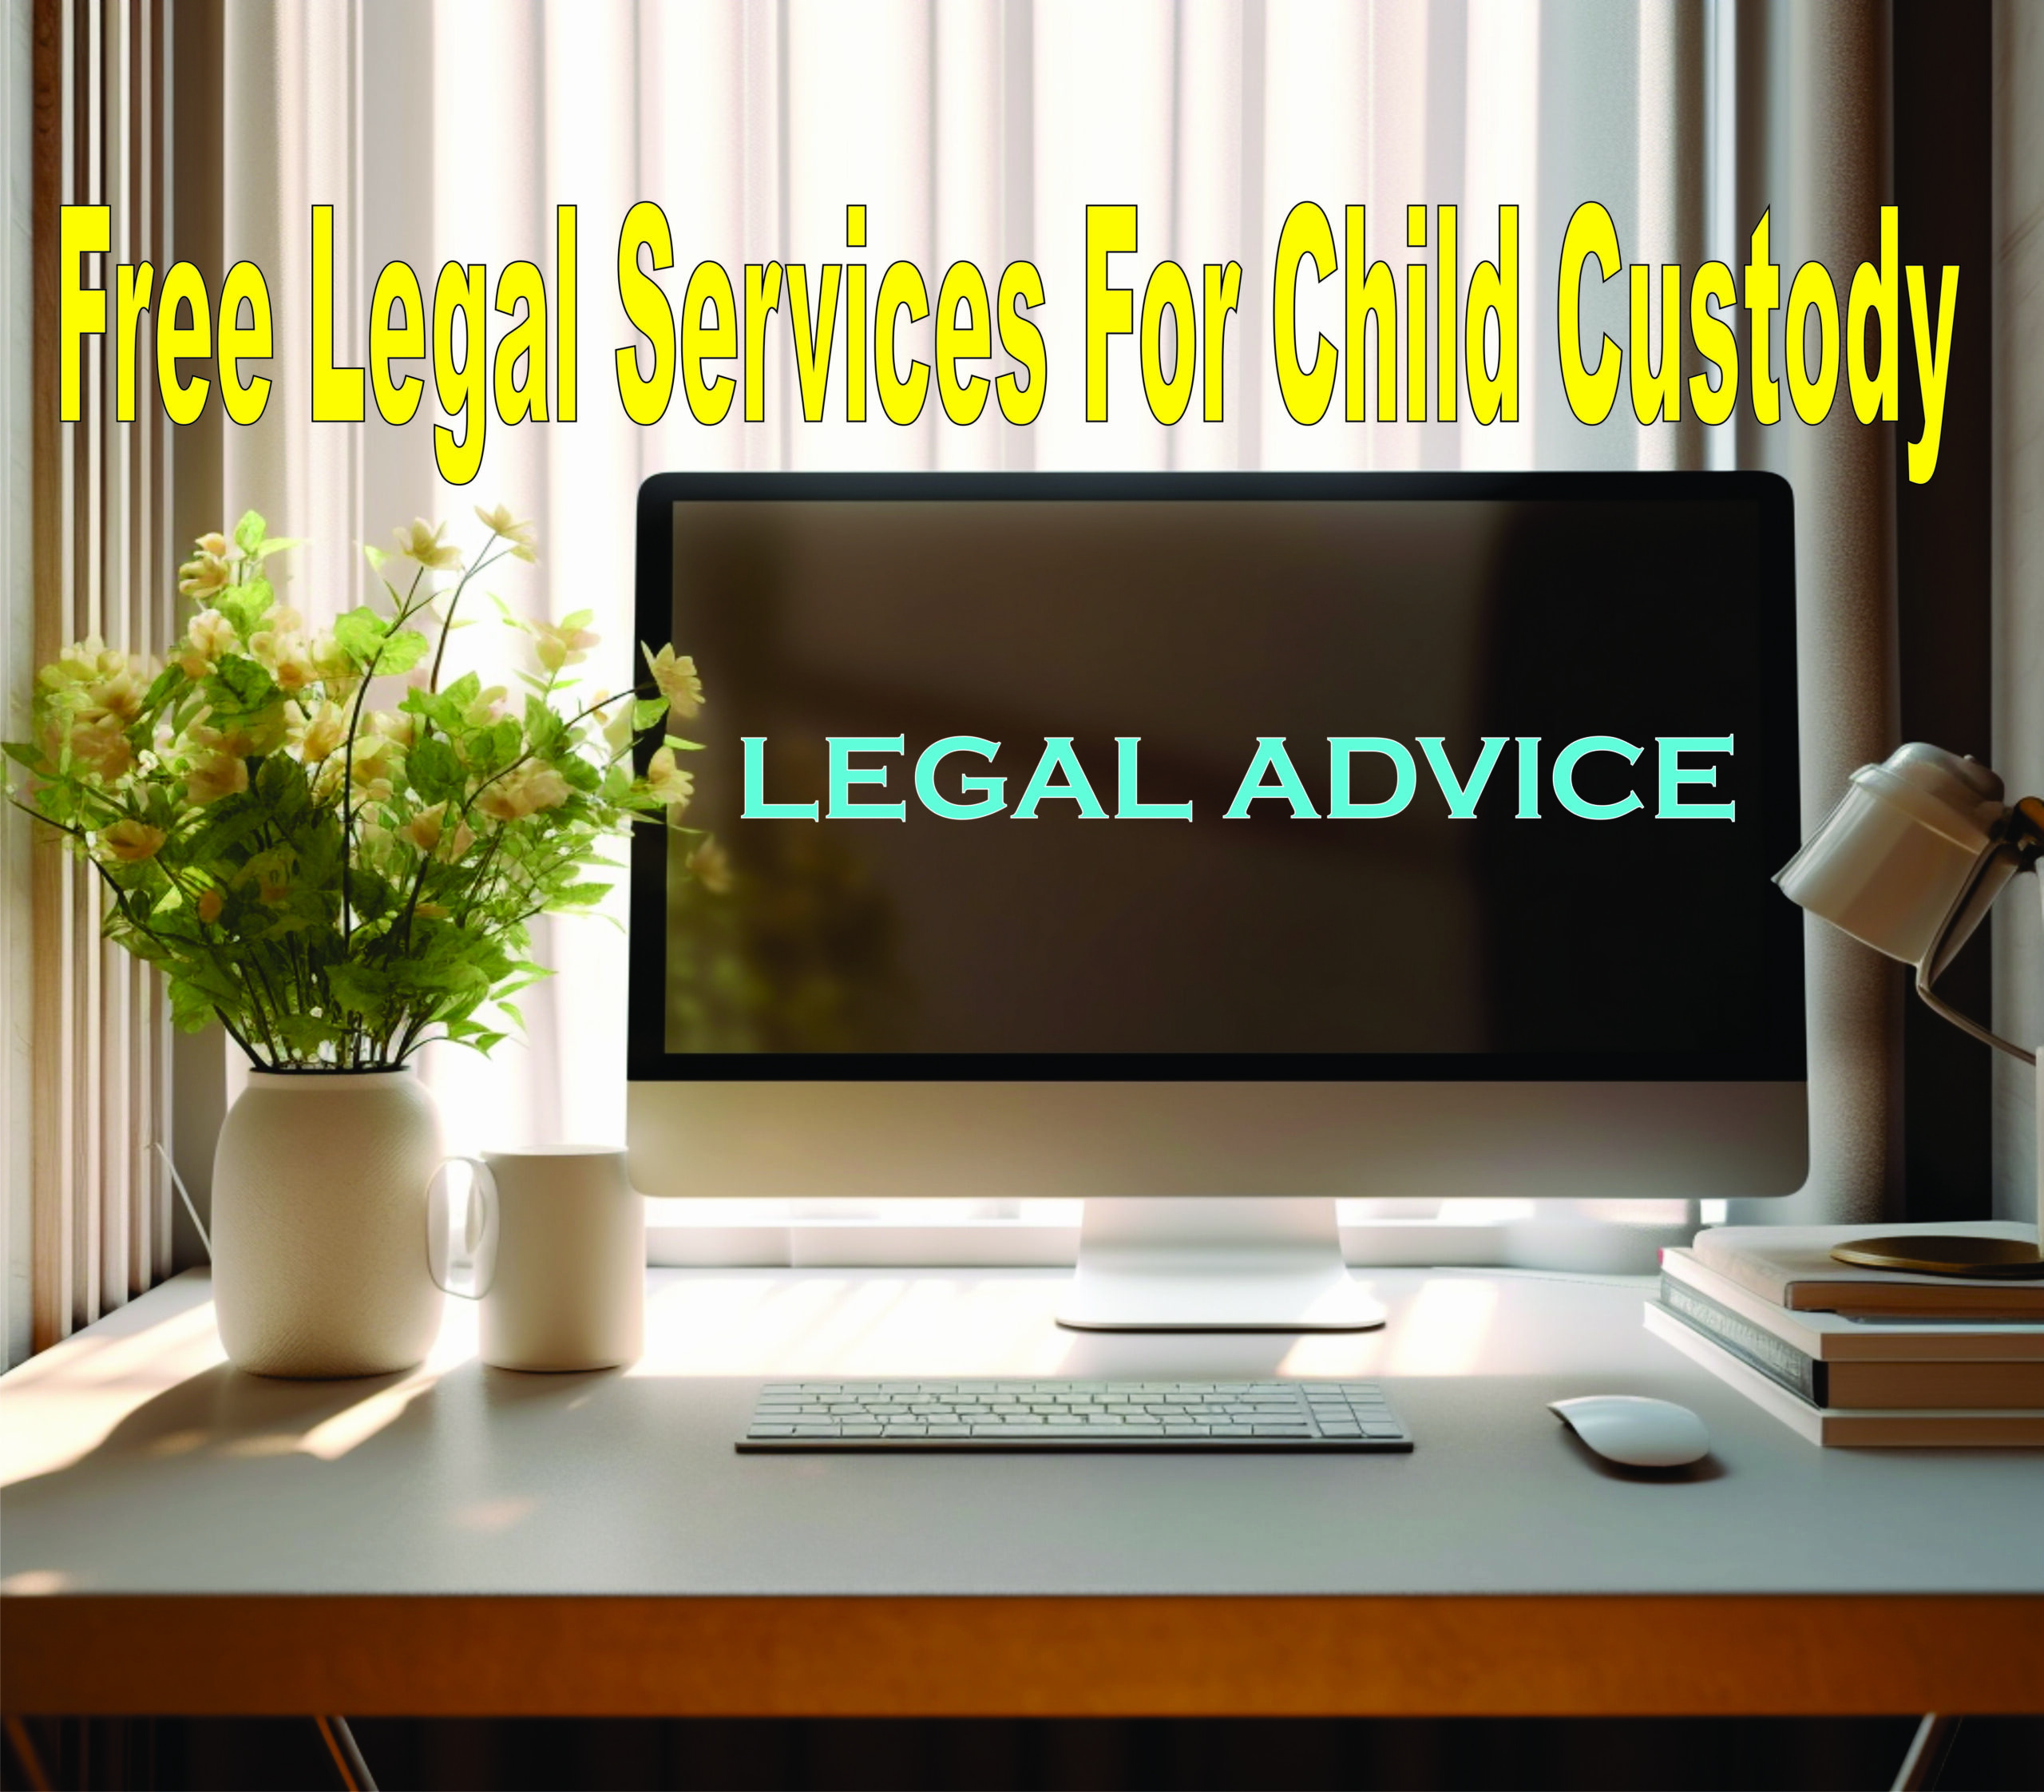 Free Legal Services For Child Custody